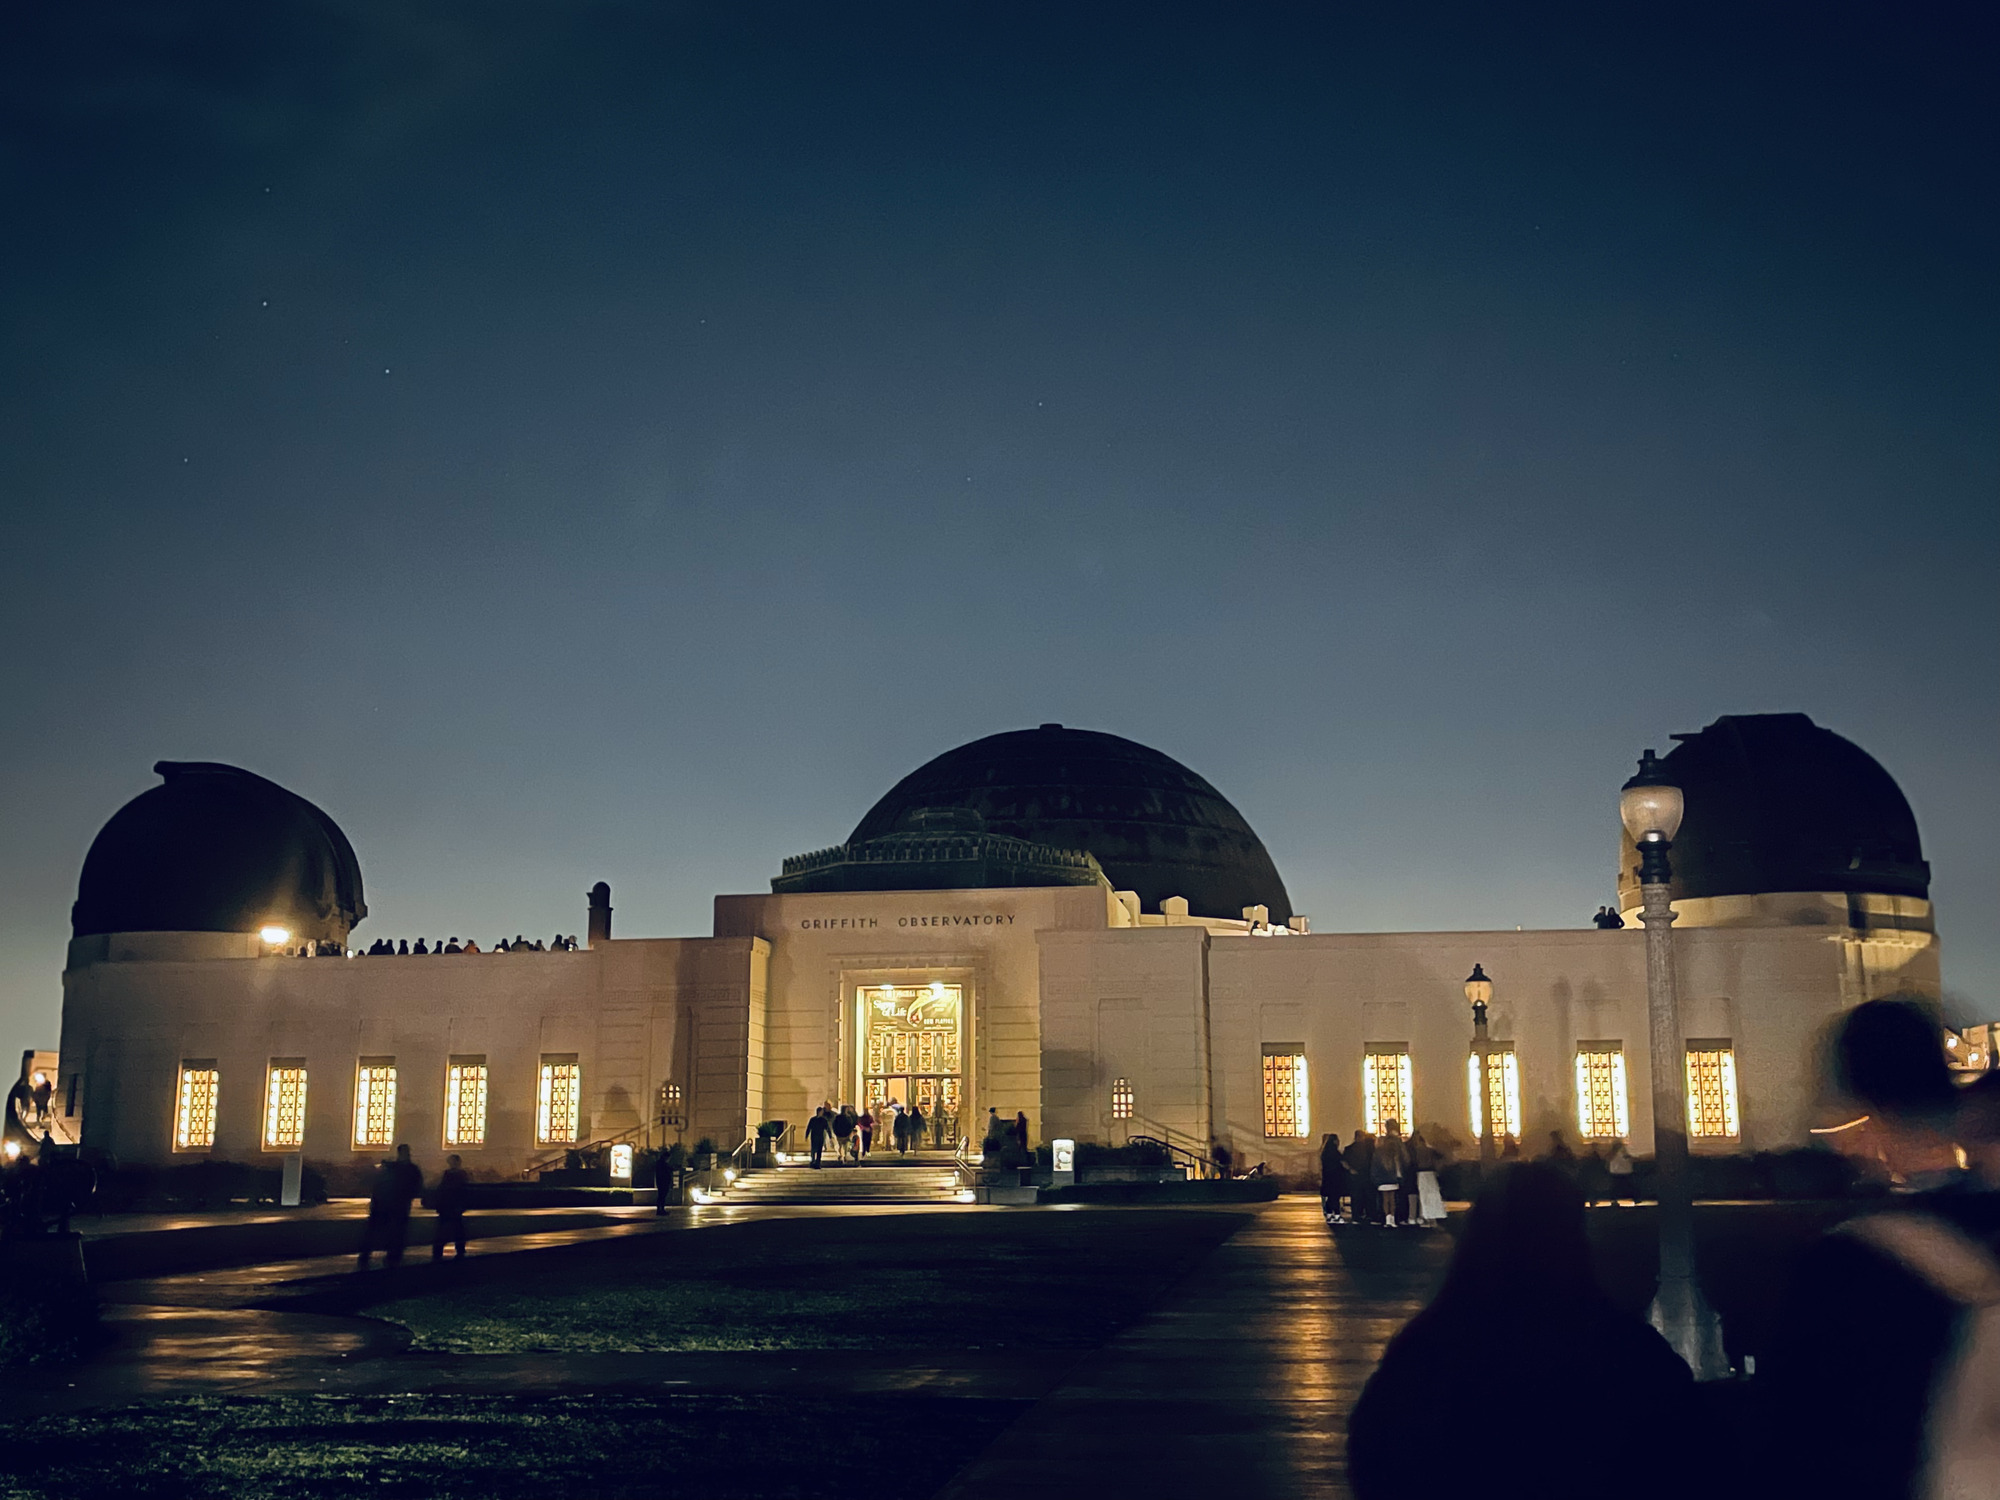 Griffith observatory in LA and Louvre museum in Paris